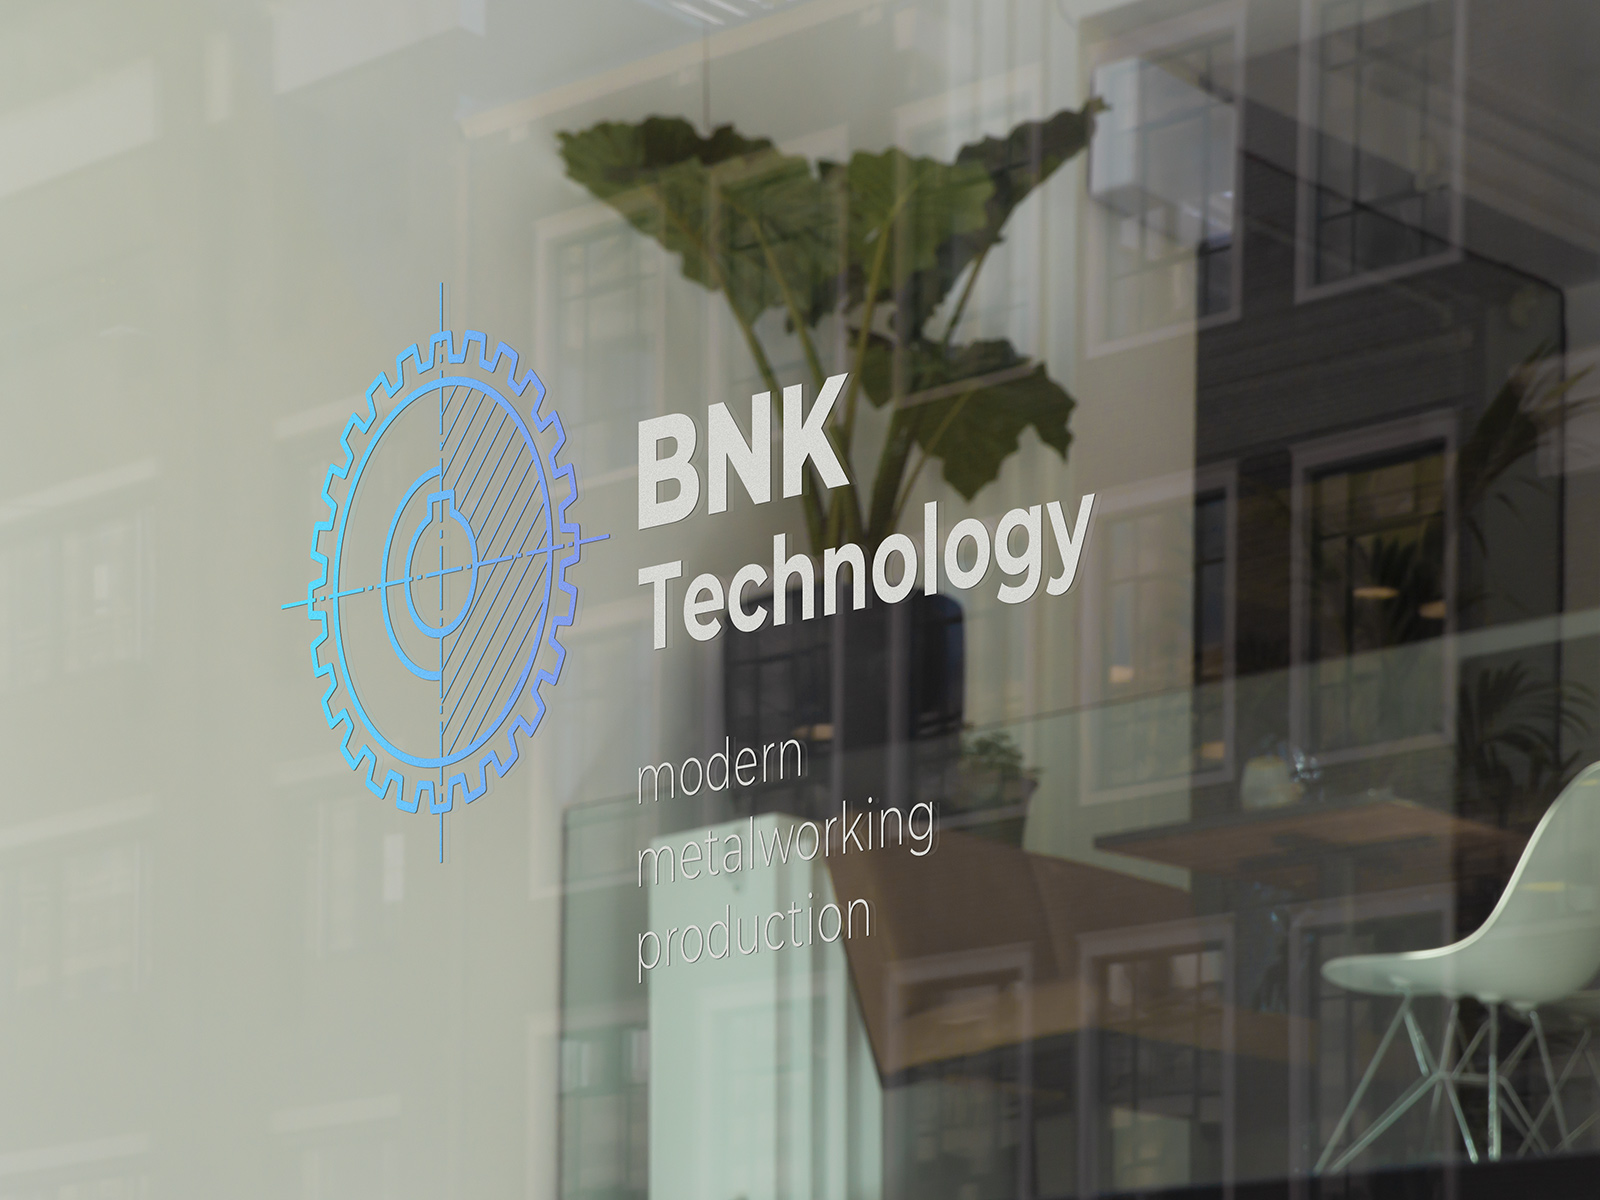 The logo of the modern metal processing company BNK Technology